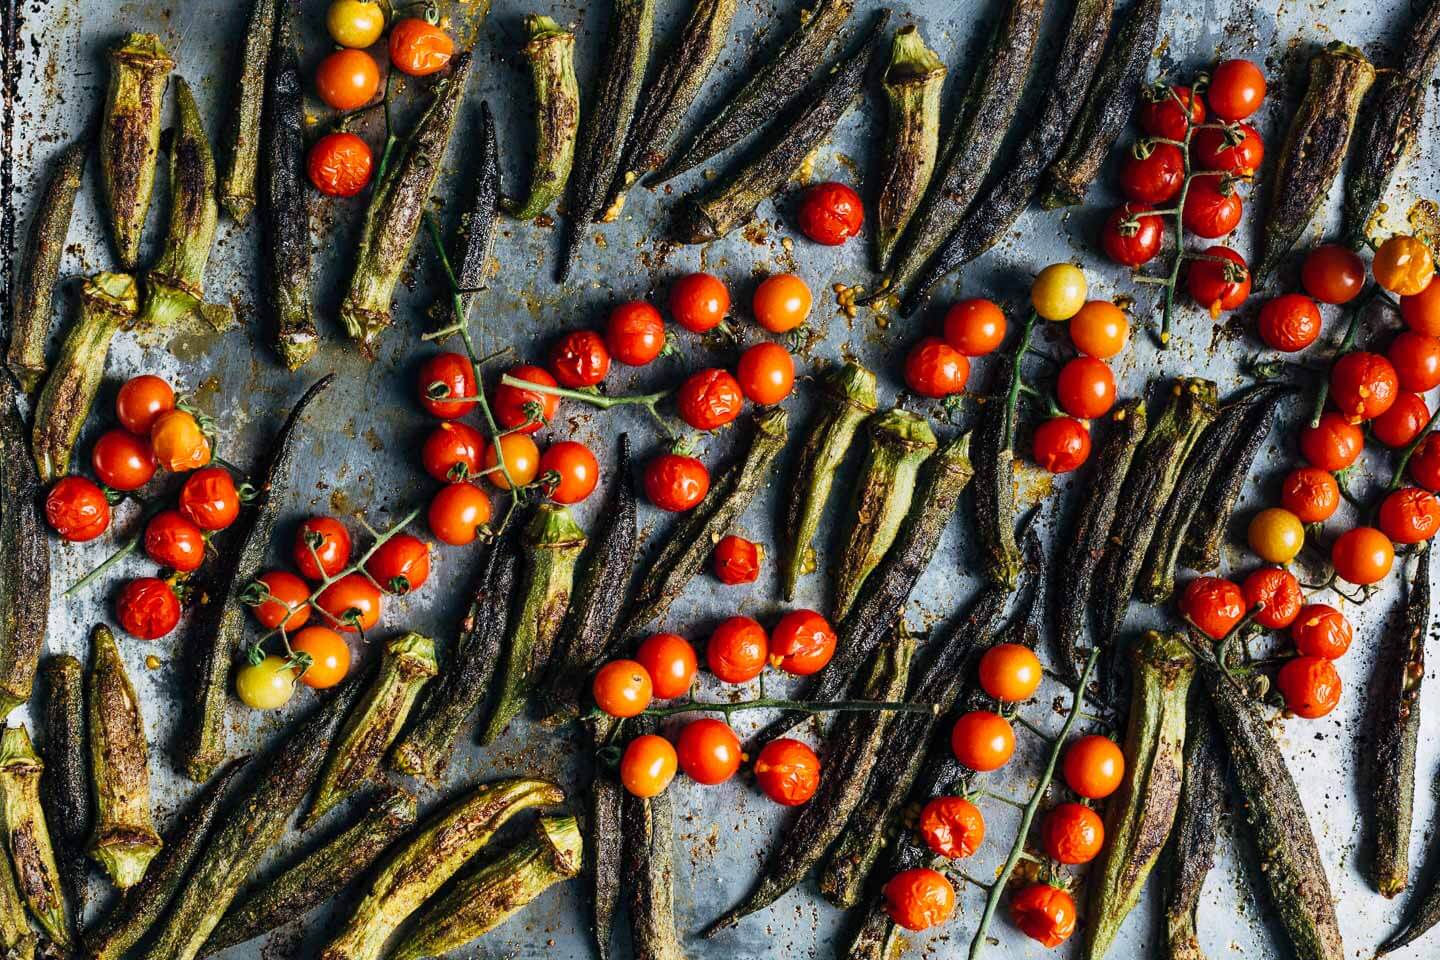 Crispy golden roasted okra and cherry tomato bunches. 